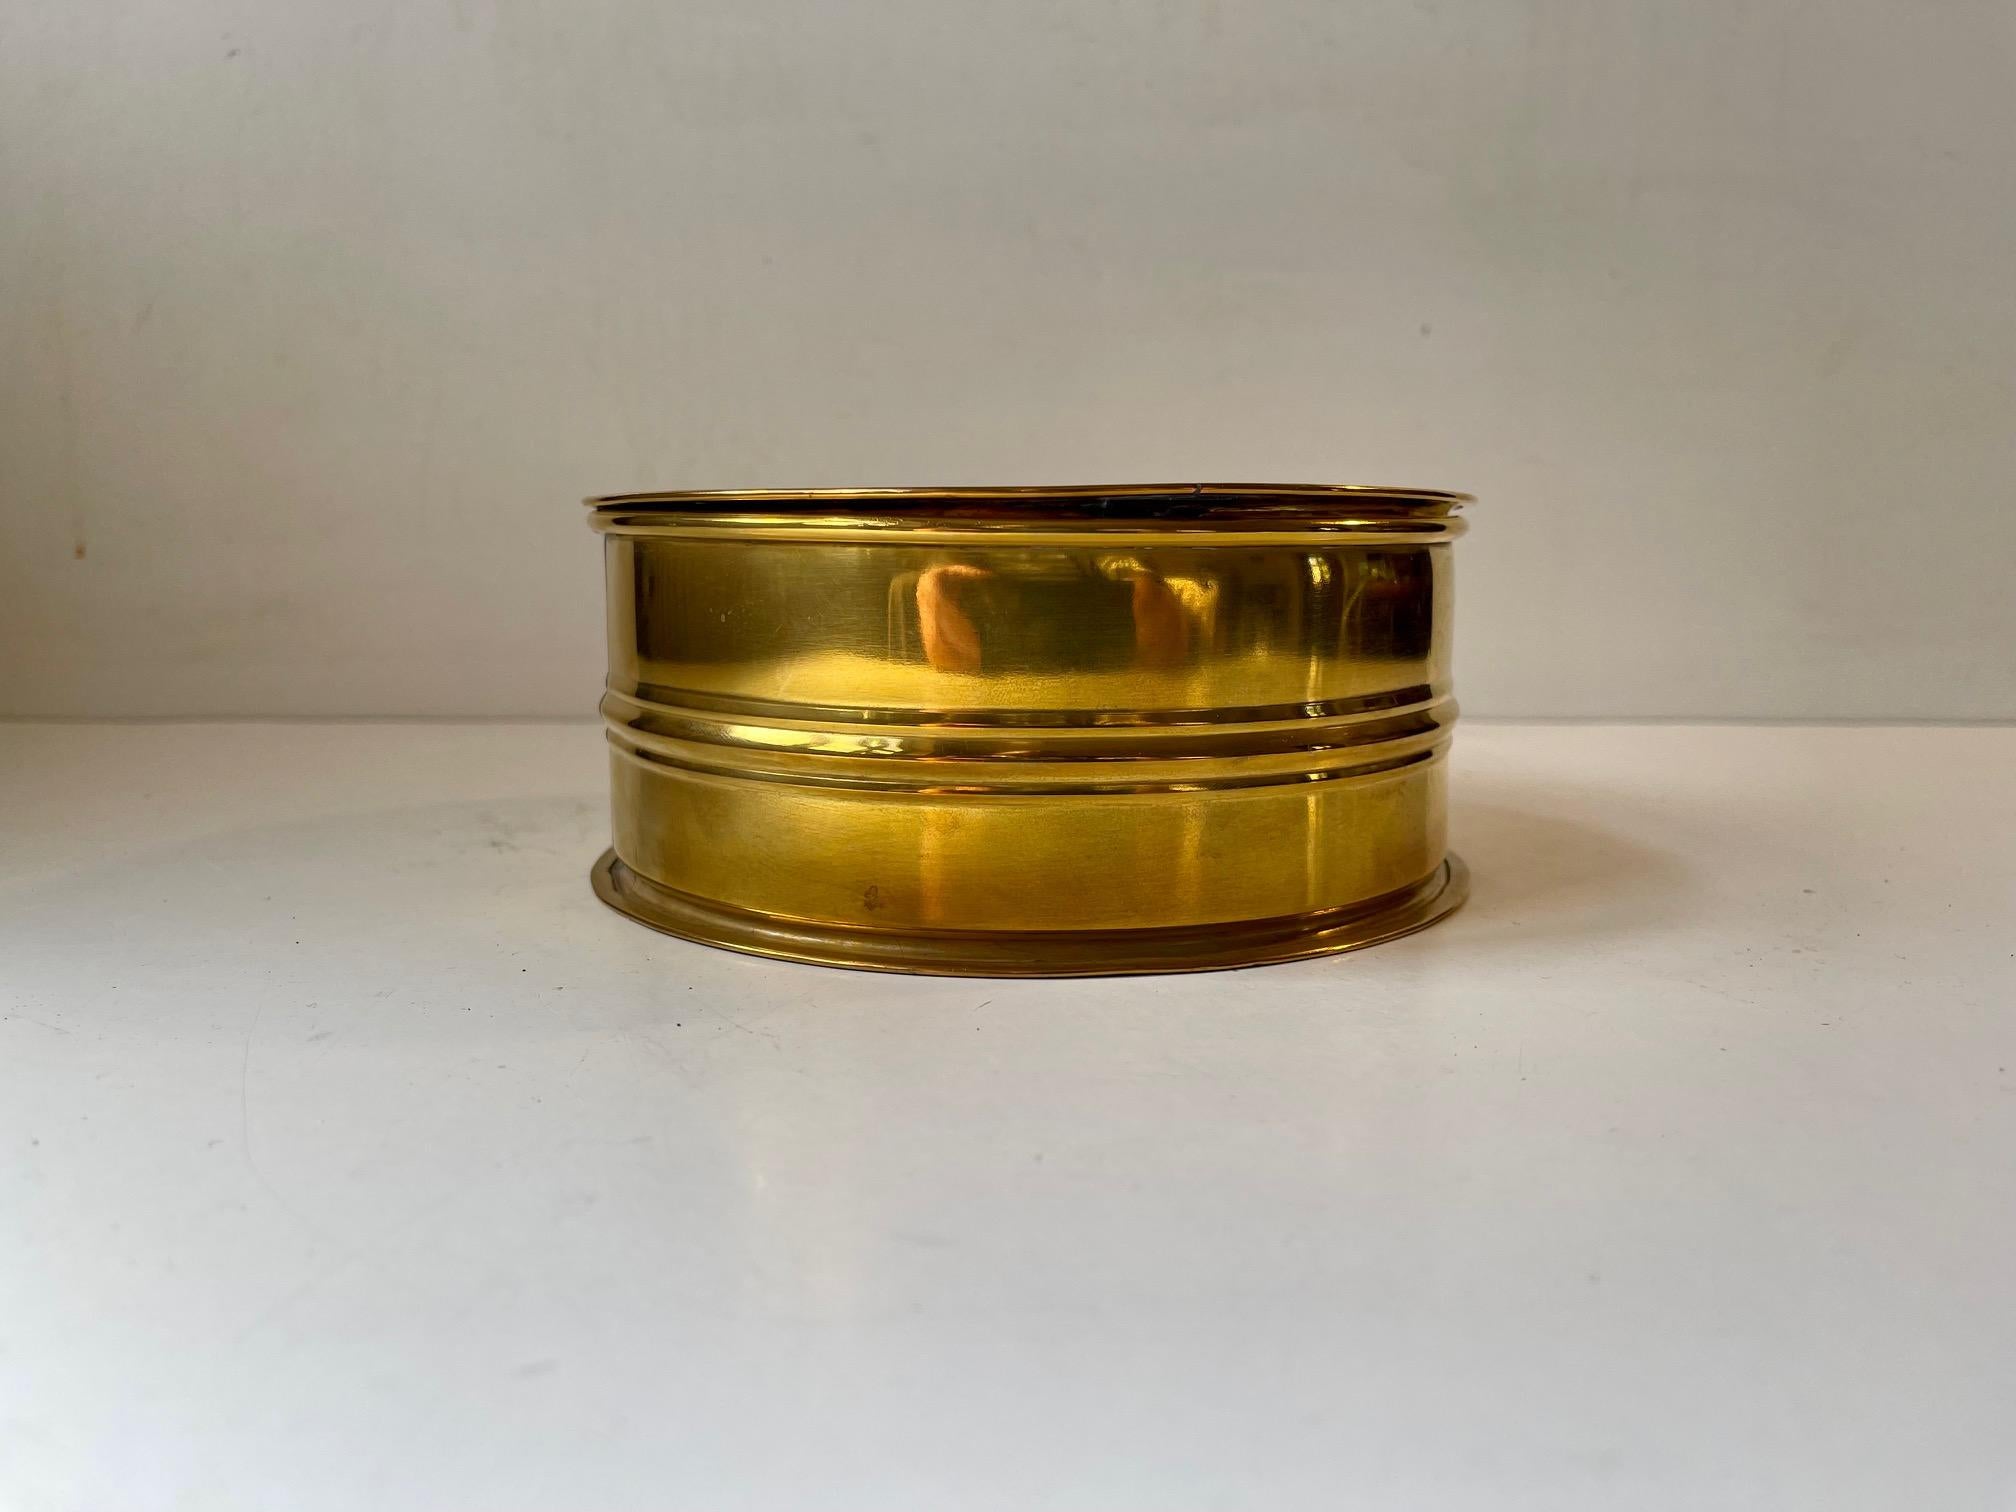 A stylish outdoor ashtray due to its size suitable for disposal of ash from cigars, pipes and cigarettes. The top removes easily for easy cleaning. It was made by Asta Nautical Equipment in Amsterdam circa 1980. Measurements: D: 16 cm, H: 7 cm.